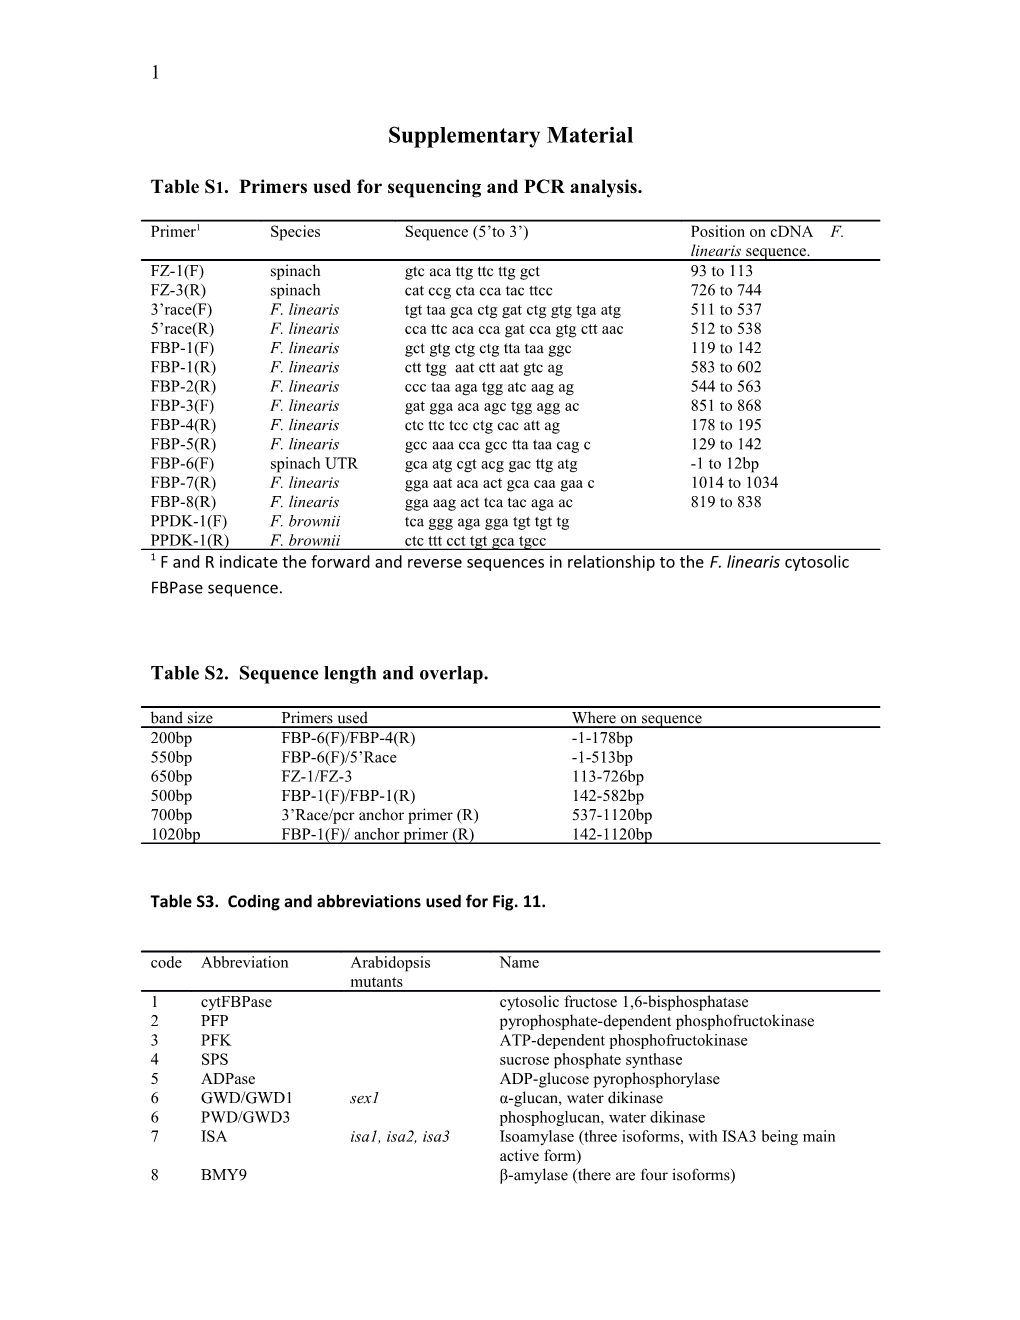 Table S1. Primers Used for Sequencing and PCR Analysis